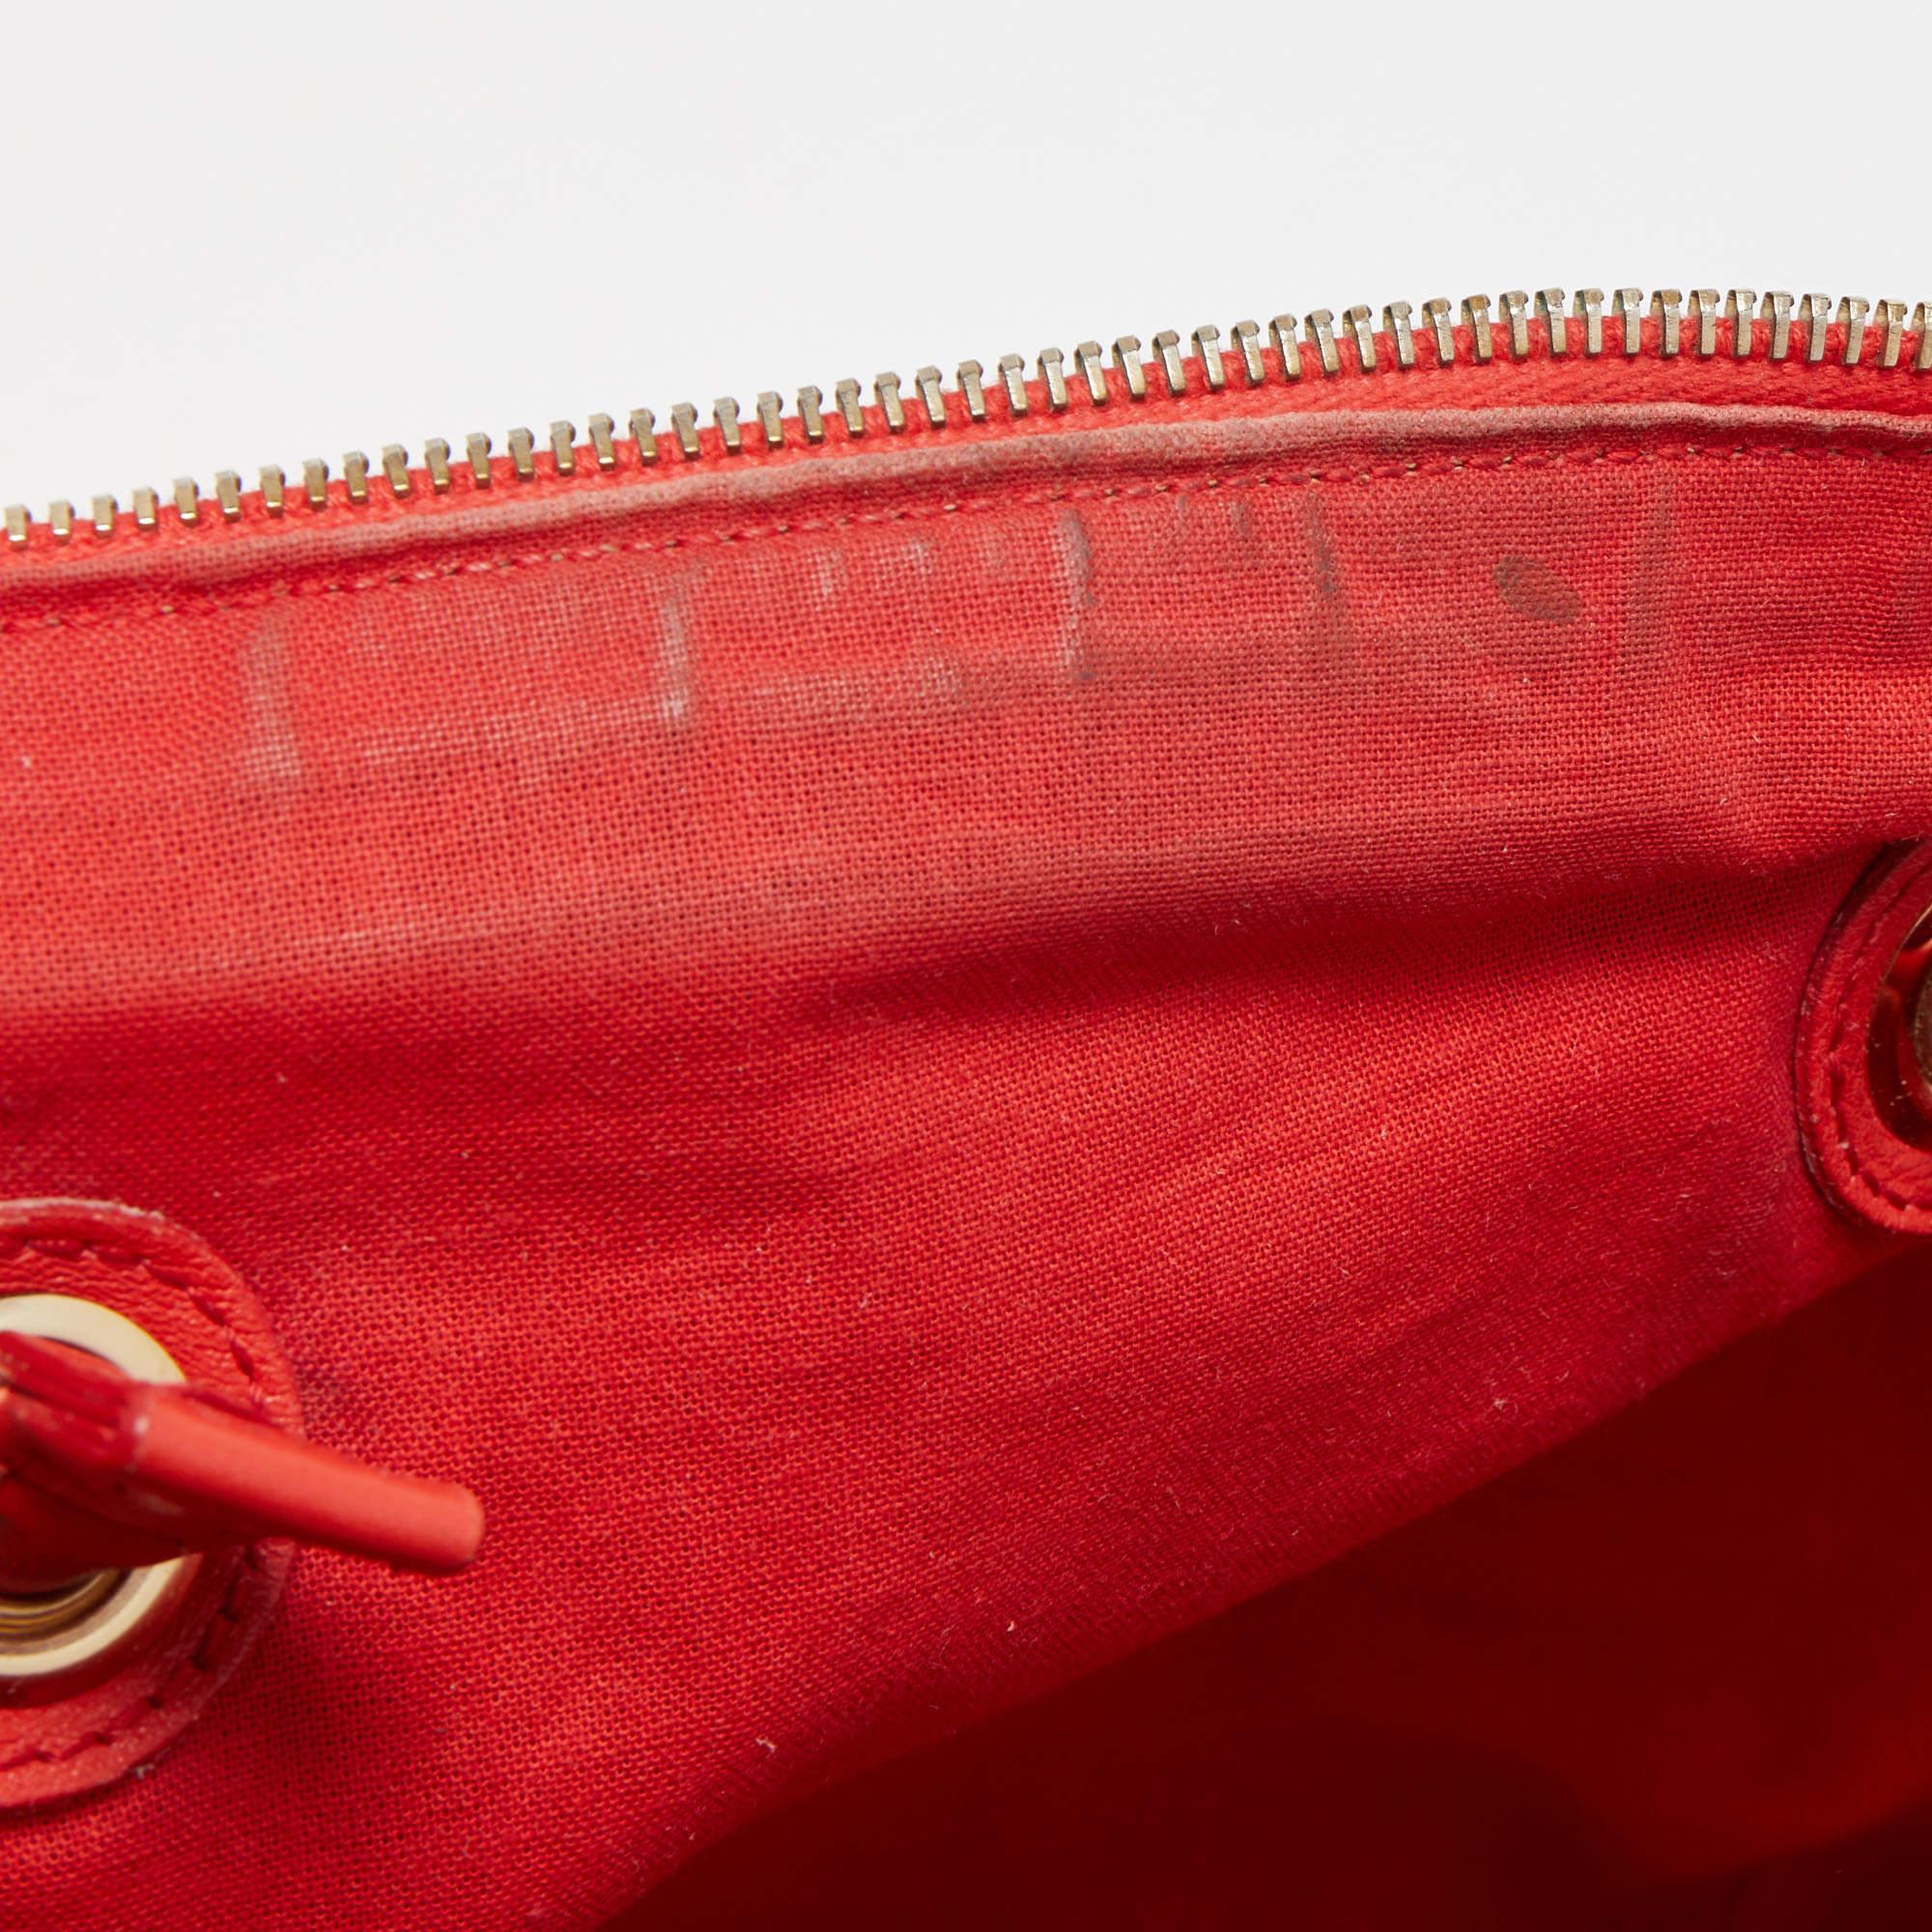 Yves Saint Laurent Red/Beige Leather Lucky Chyc Bowler Bag 13